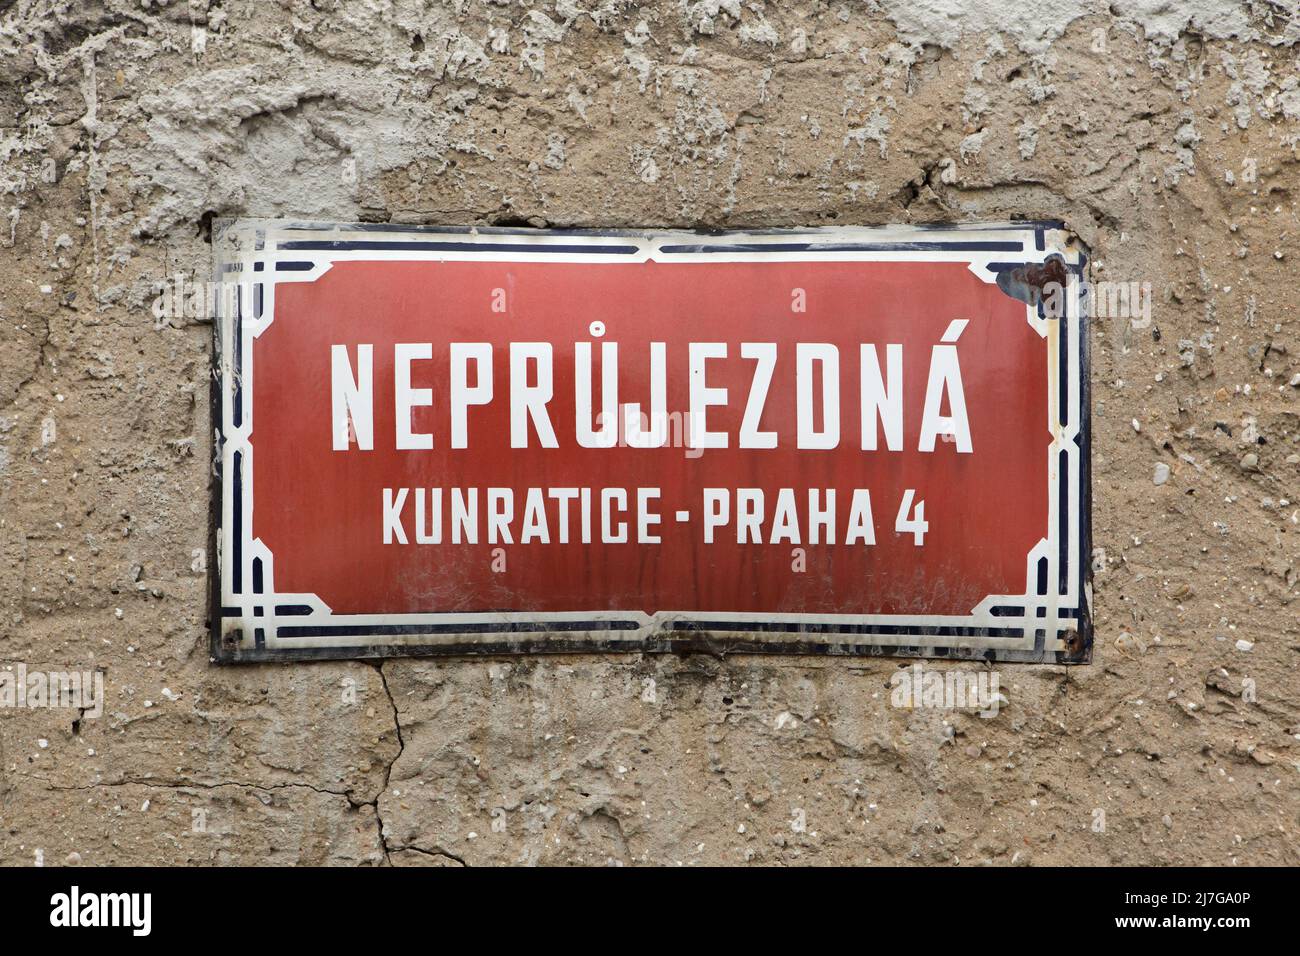 Neprůjezdná Street. Traditional red street sign in Kunratice district in Prague, Czech Republic. The street name is literary translated as the impassable street. Stock Photo